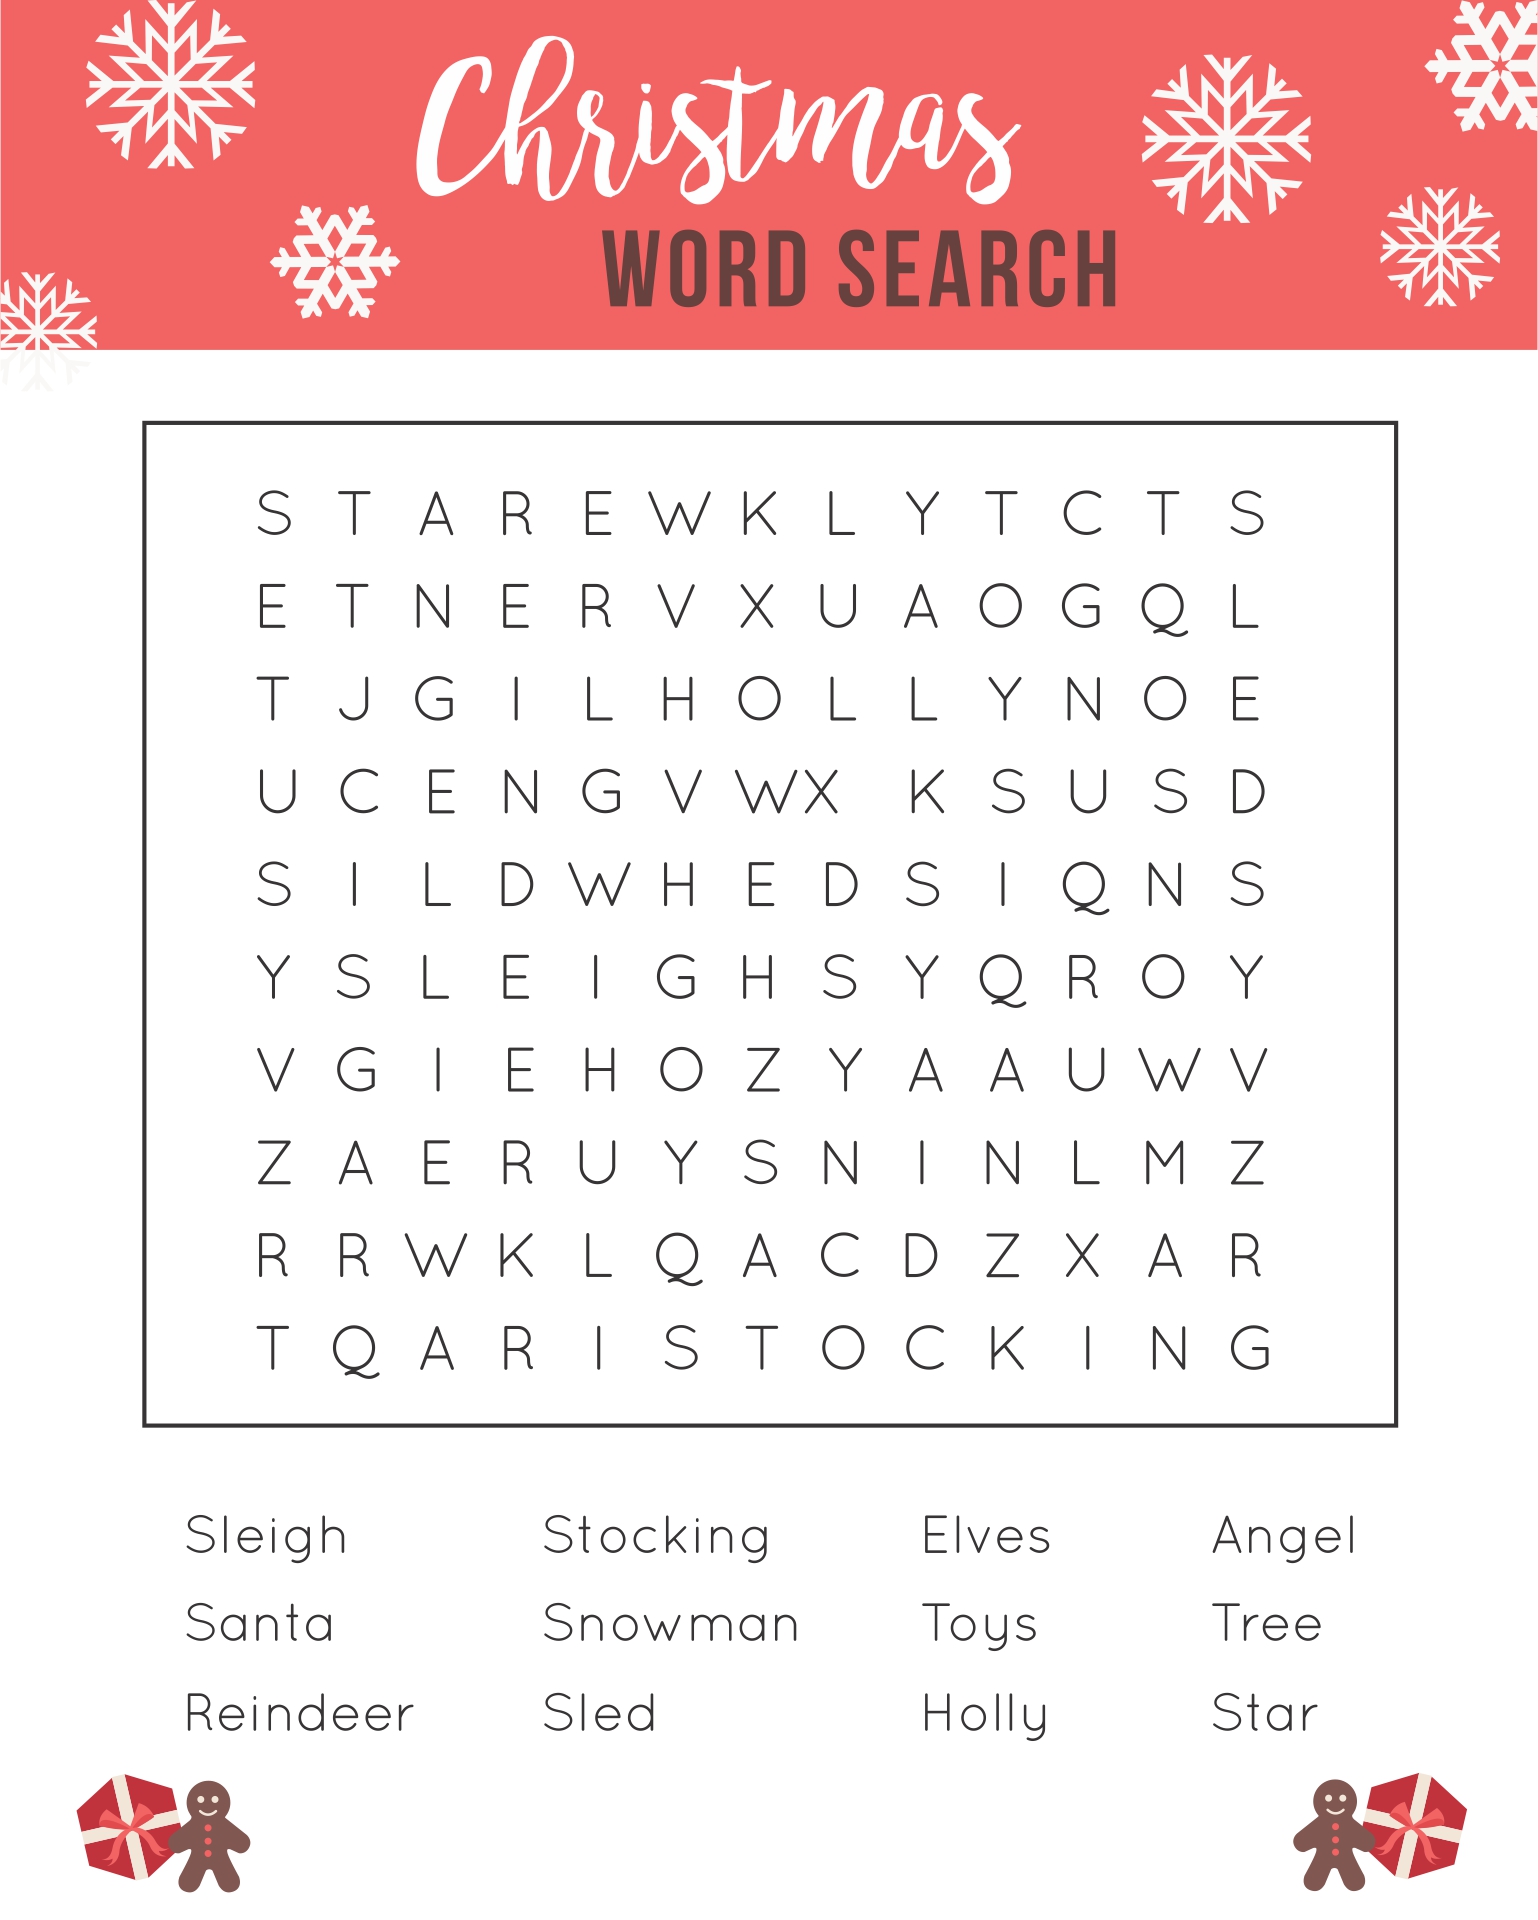 free-christmas-word-search-printable-go-here-to-print-http